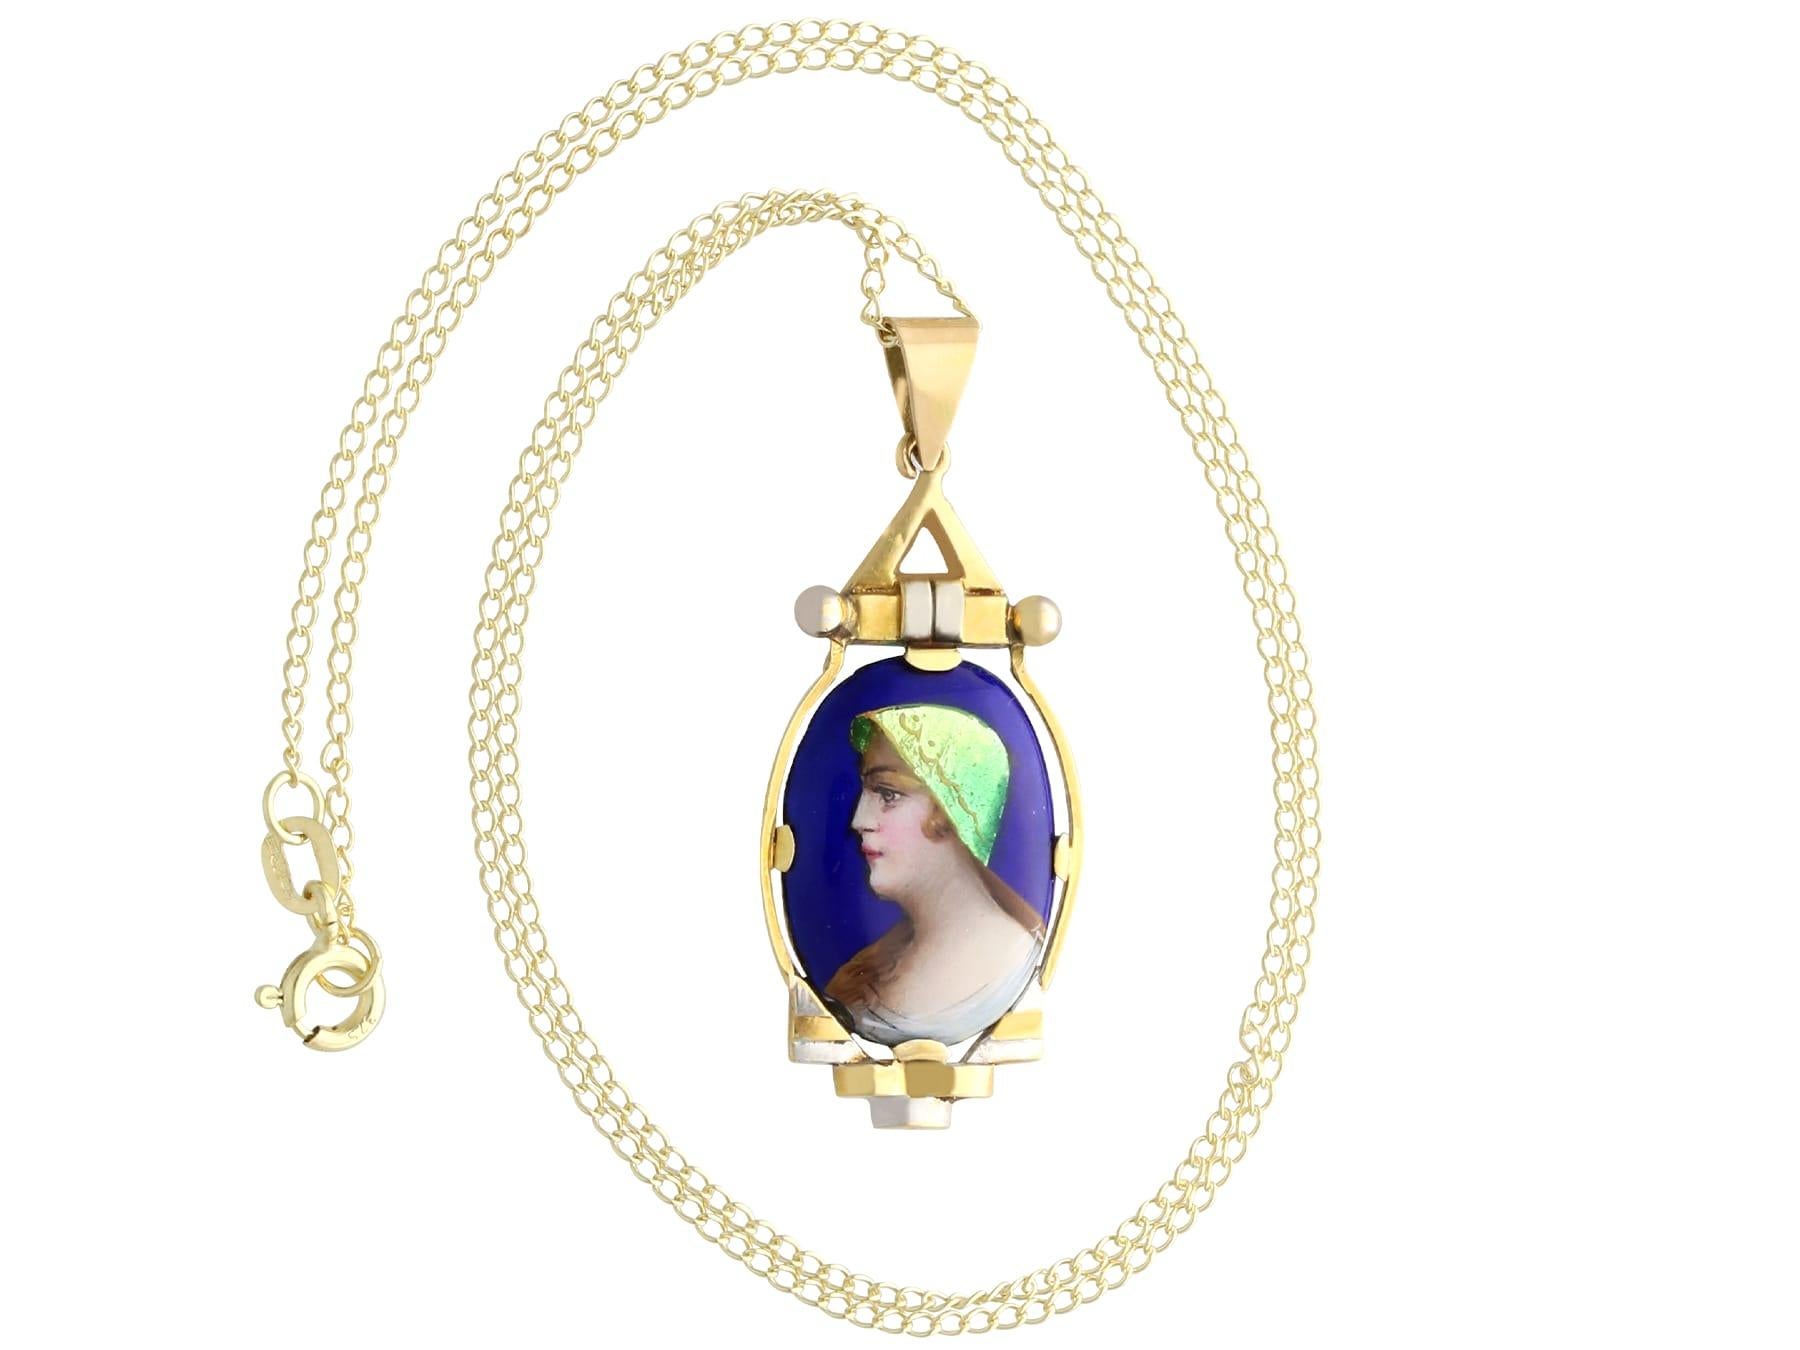 Antique French Enamel and 18k Yellow Gold Pendant Circa 1910 In Excellent Condition For Sale In Jesmond, Newcastle Upon Tyne